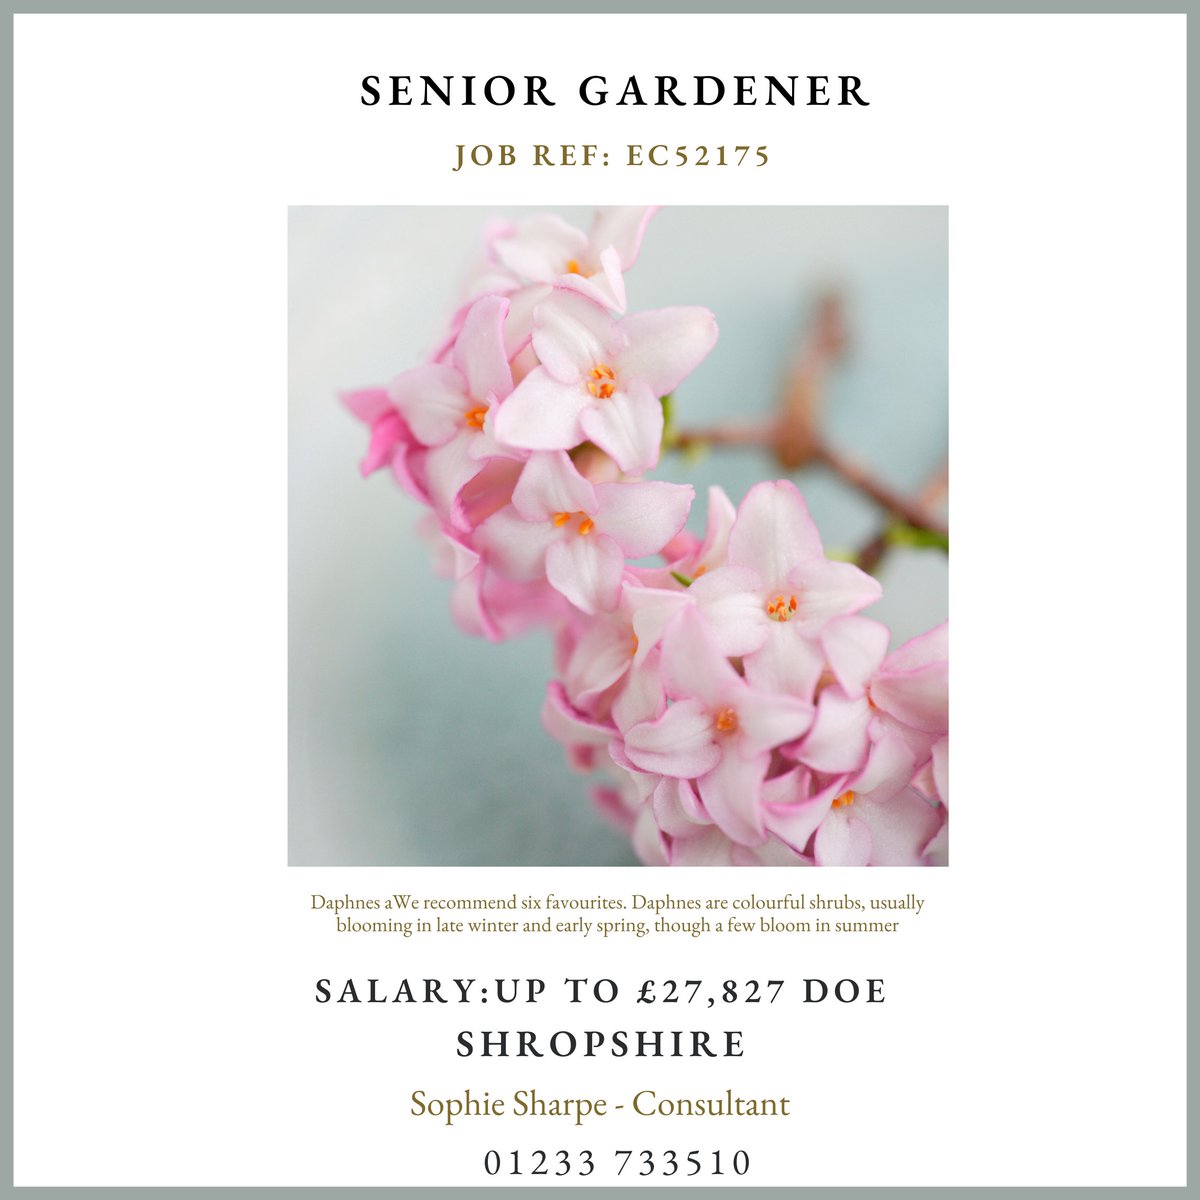 Our client is a school with a global reputation and inspiring facilities based in Shropshire. The Estates department is looking for a qualified and efficient Senior Gardener to join their friendly team.

EC52175. englishcountrygardeners.co.uk/job/gardening-…

#shropshirejobs #jobsinshropshire